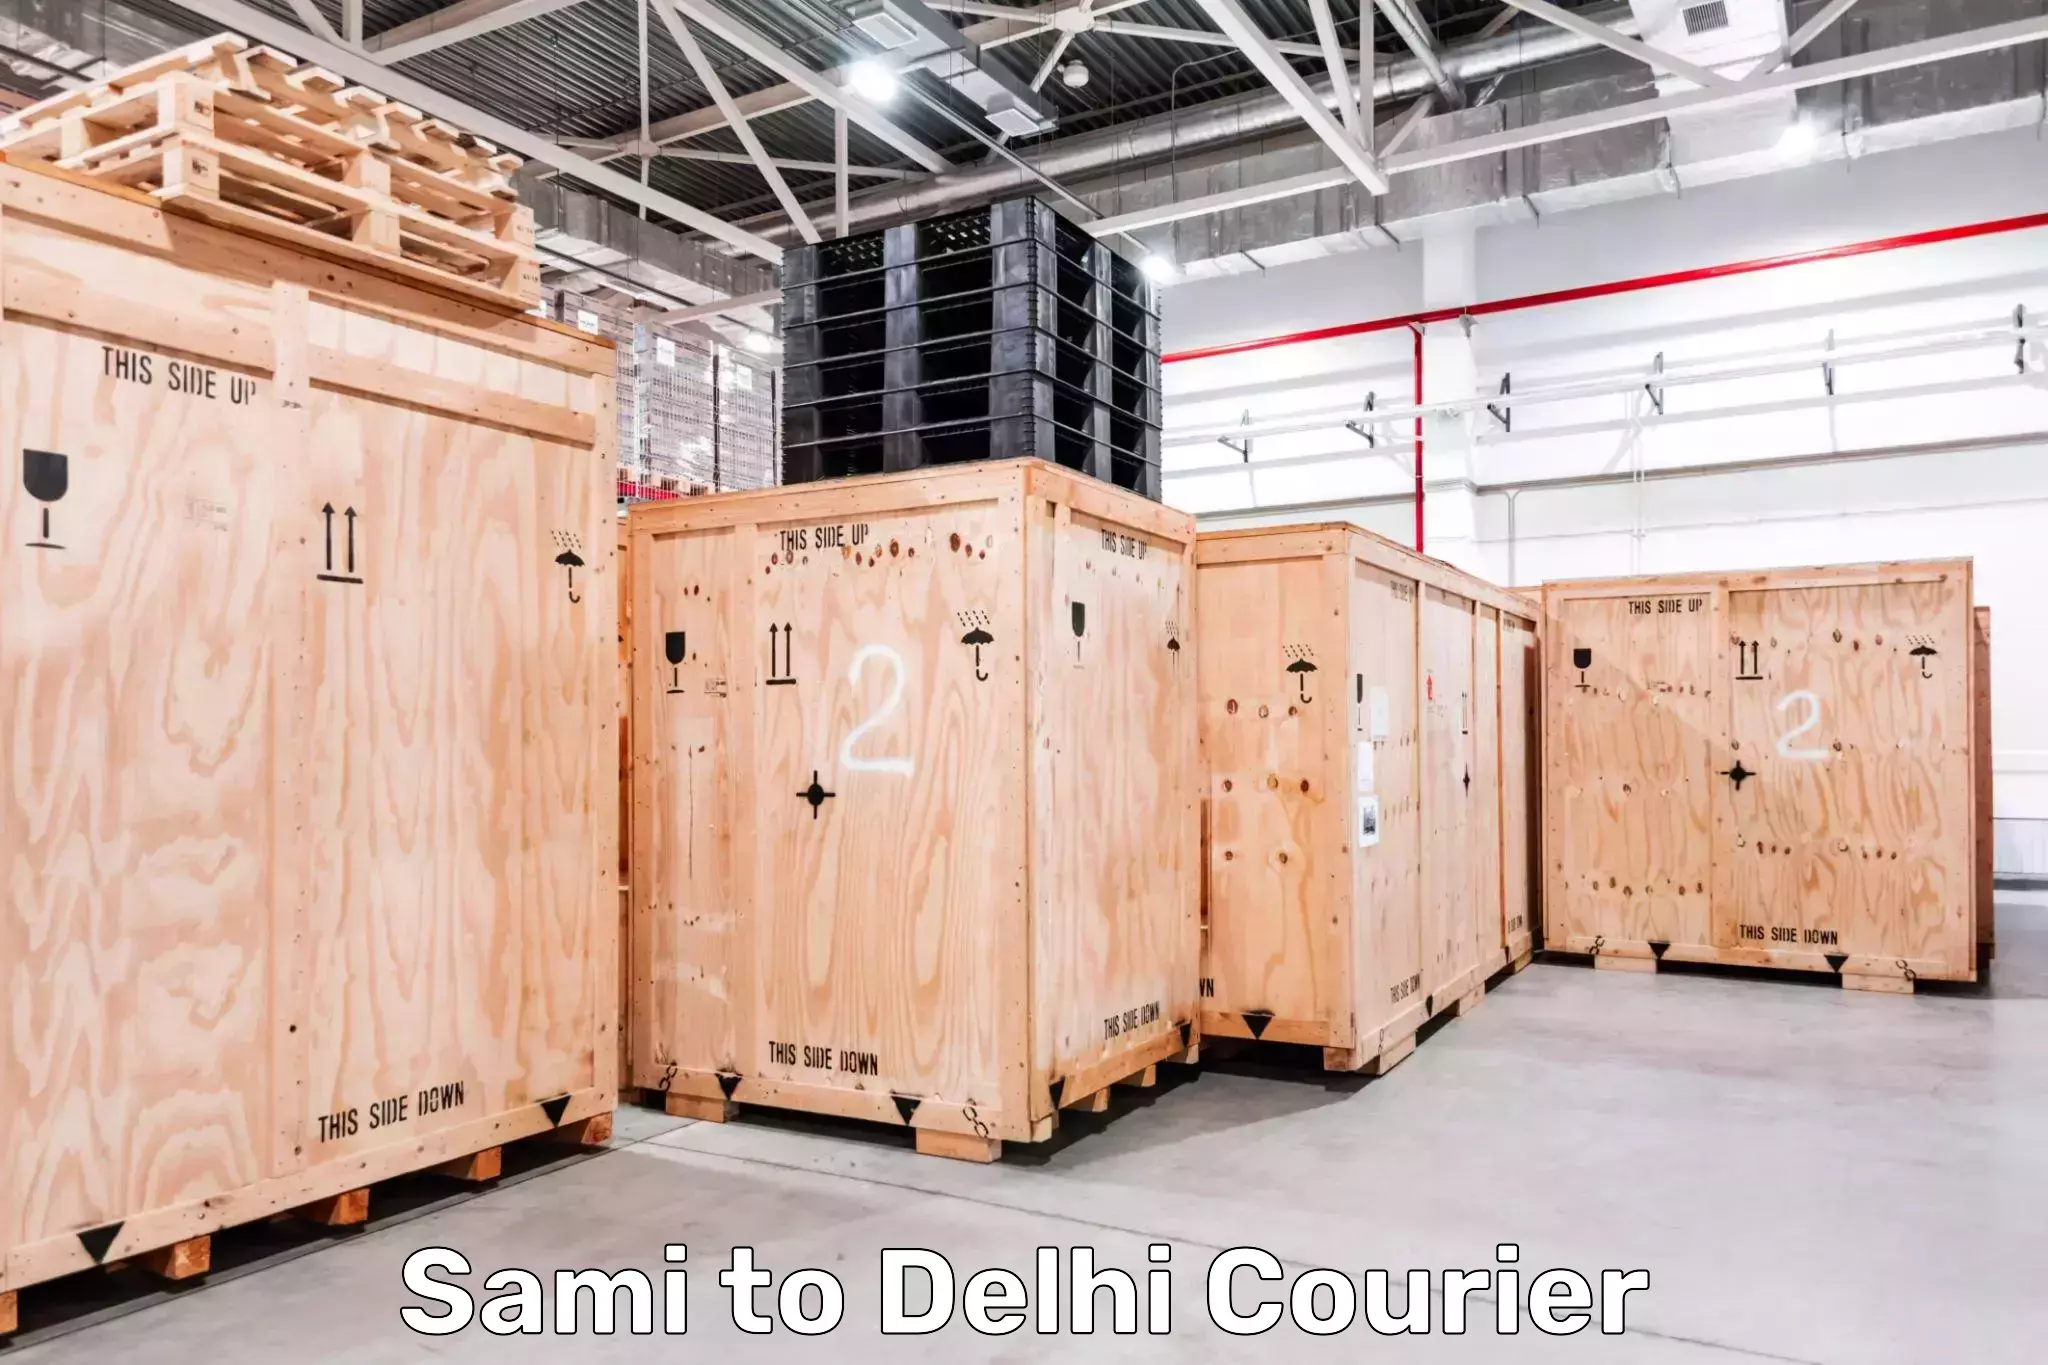 High-speed parcel service Sami to NCR